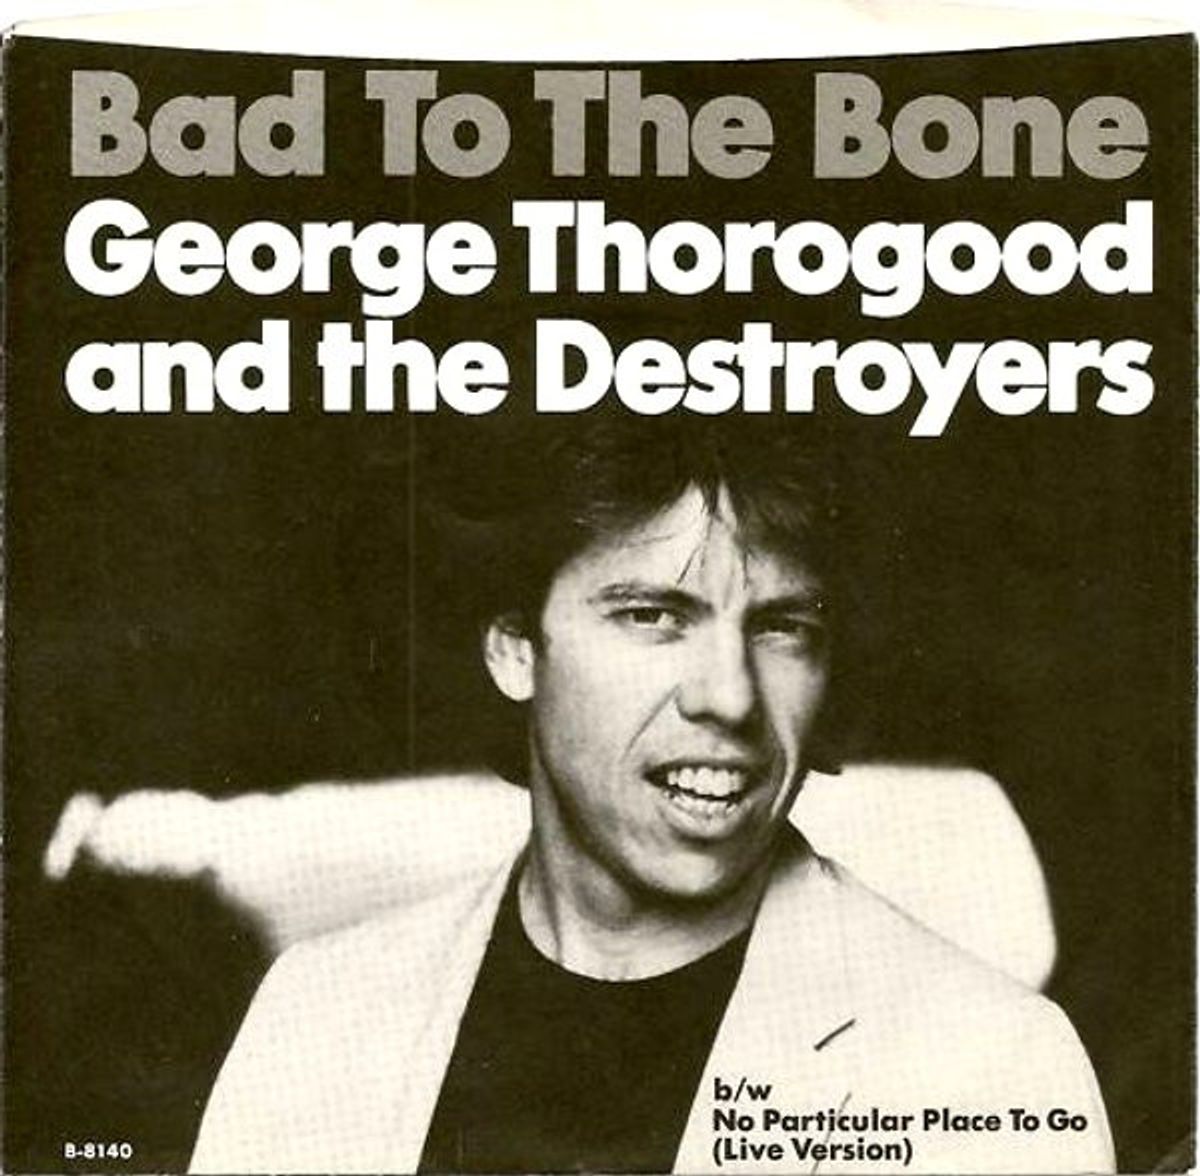 #Sttttotter -  George Thorogood & the Destroyers - Bad To The Bone (1982)